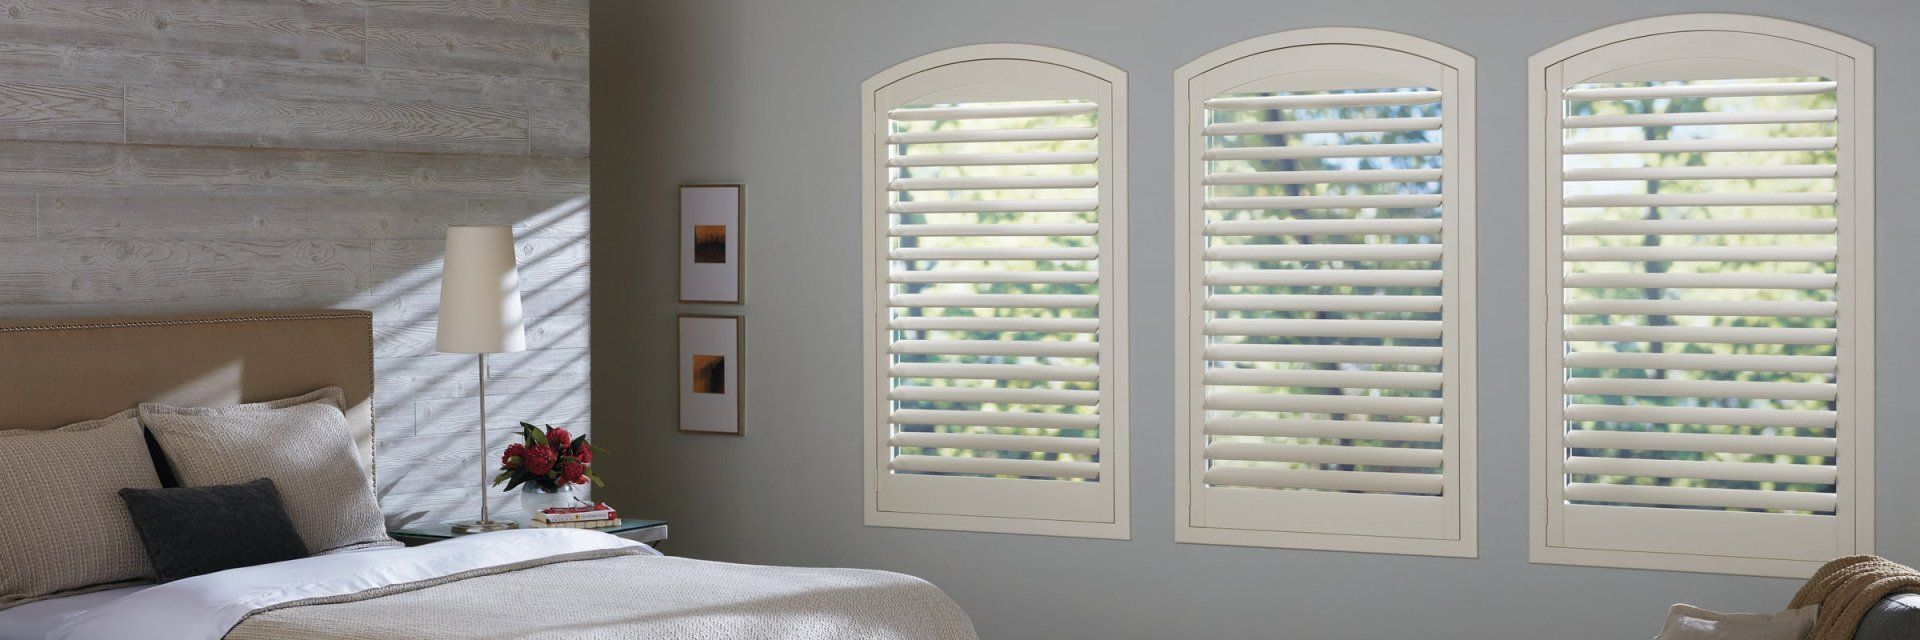 NEWSTYLE® Hybrid Shutters white arched in well designed bedroom